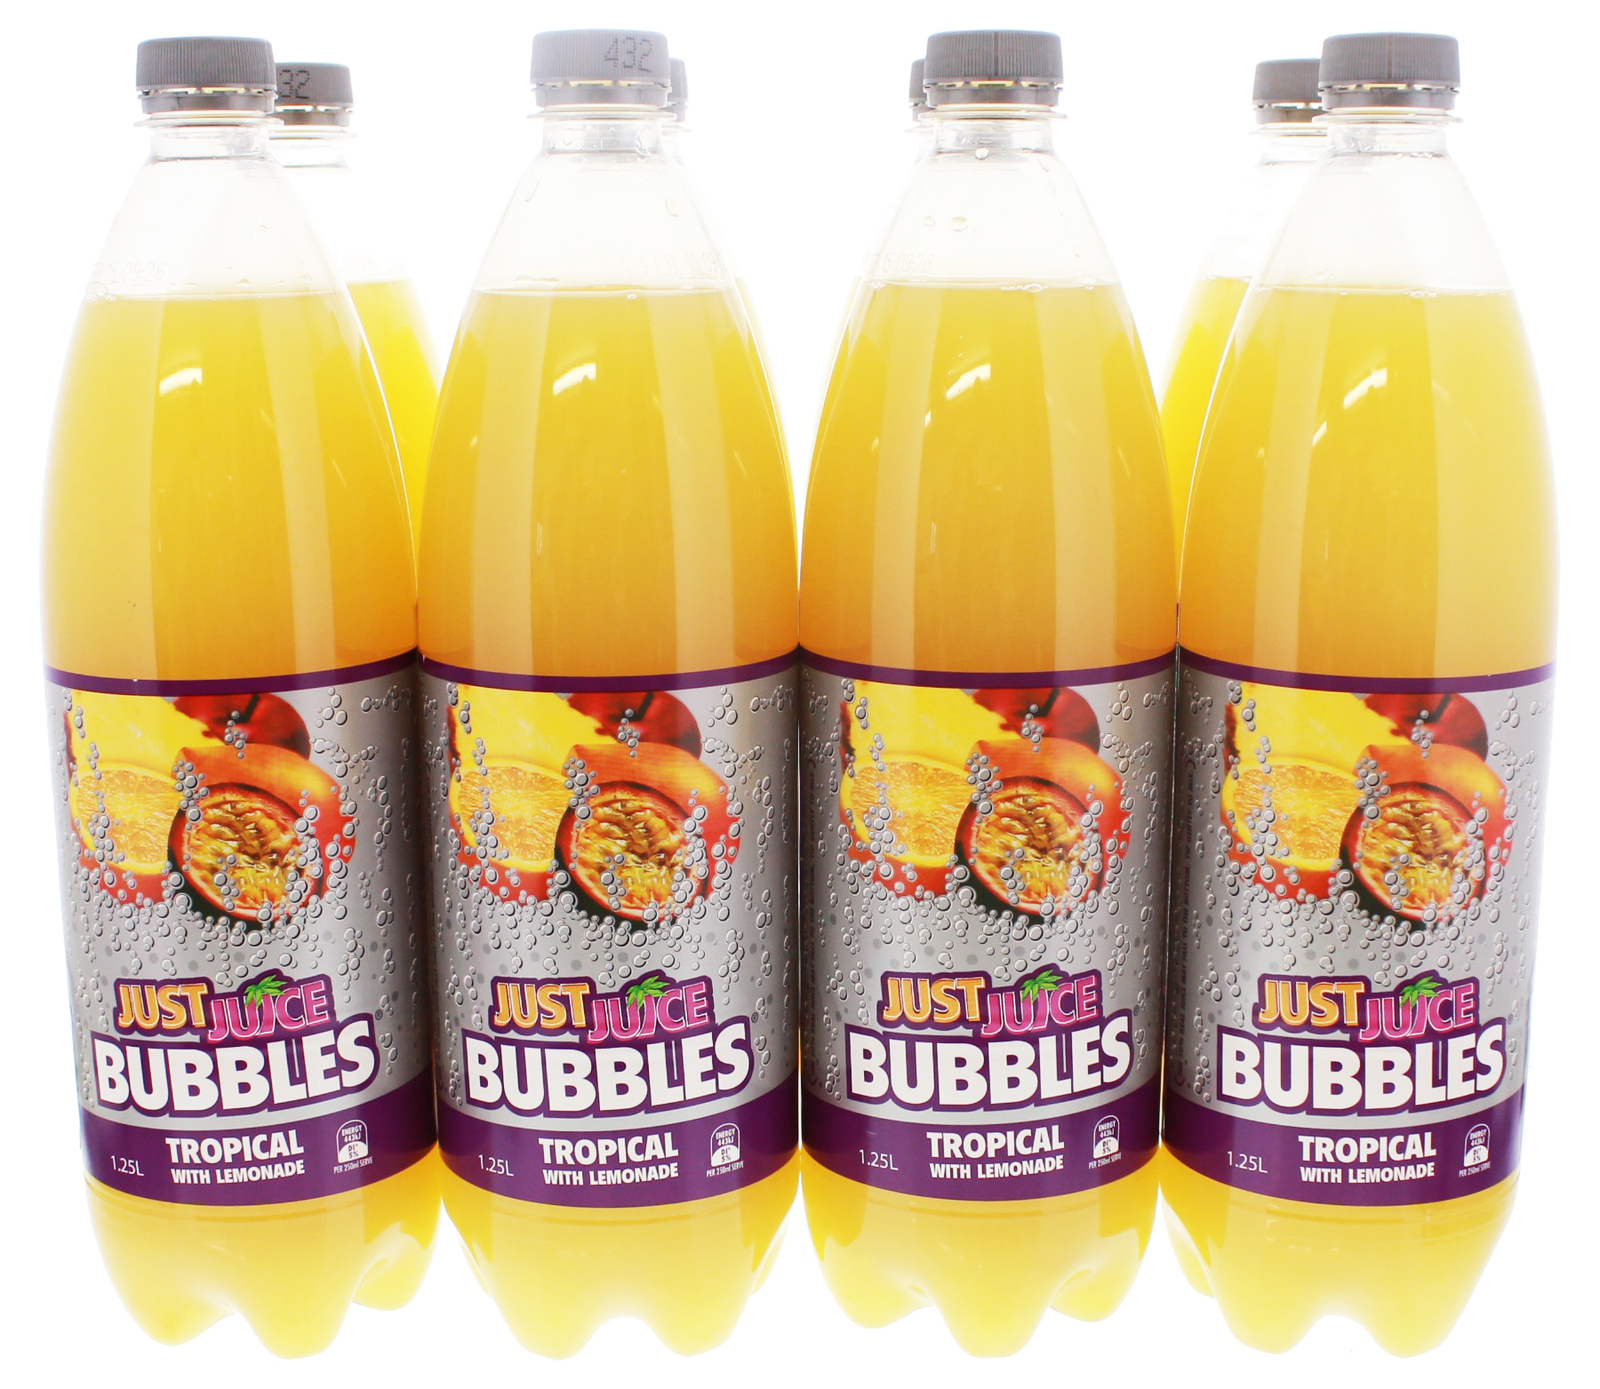 Just Juice Bubbles Tropical | at Mighty Ape NZ